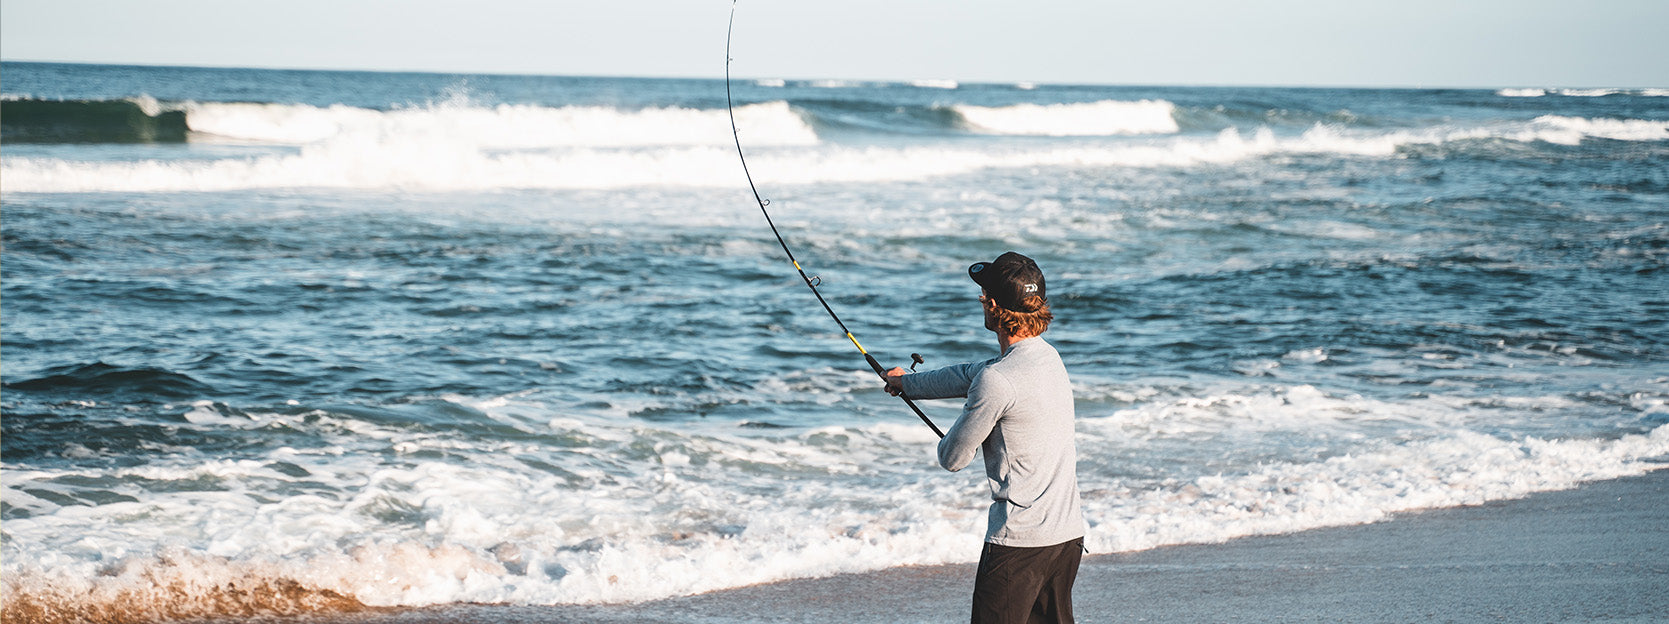 How to Catch Mulloway in the Surf